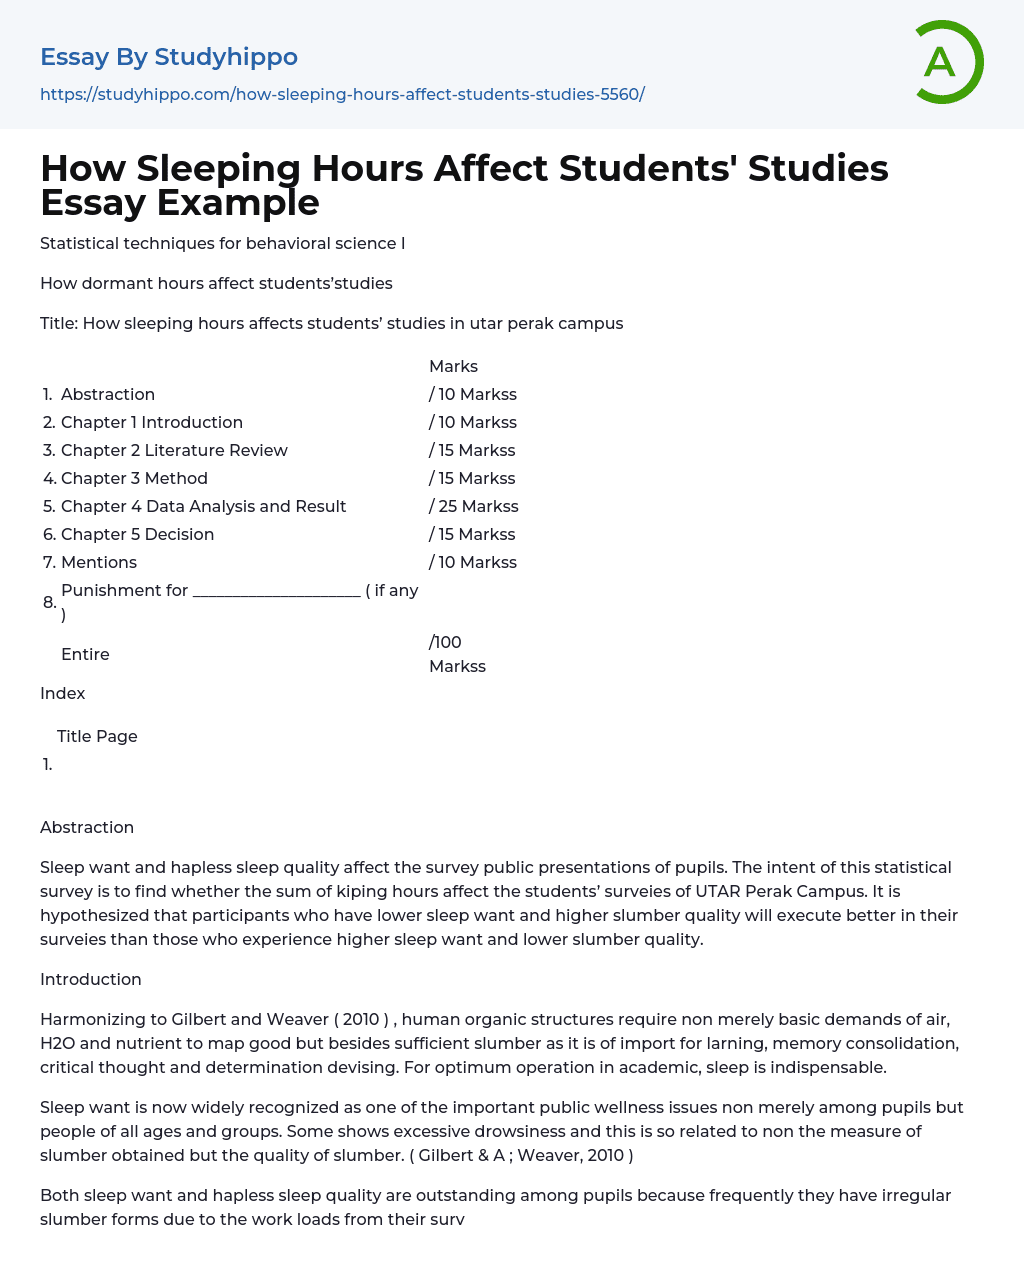 How Sleeping Hours Affect Students’ Studies Essay Example